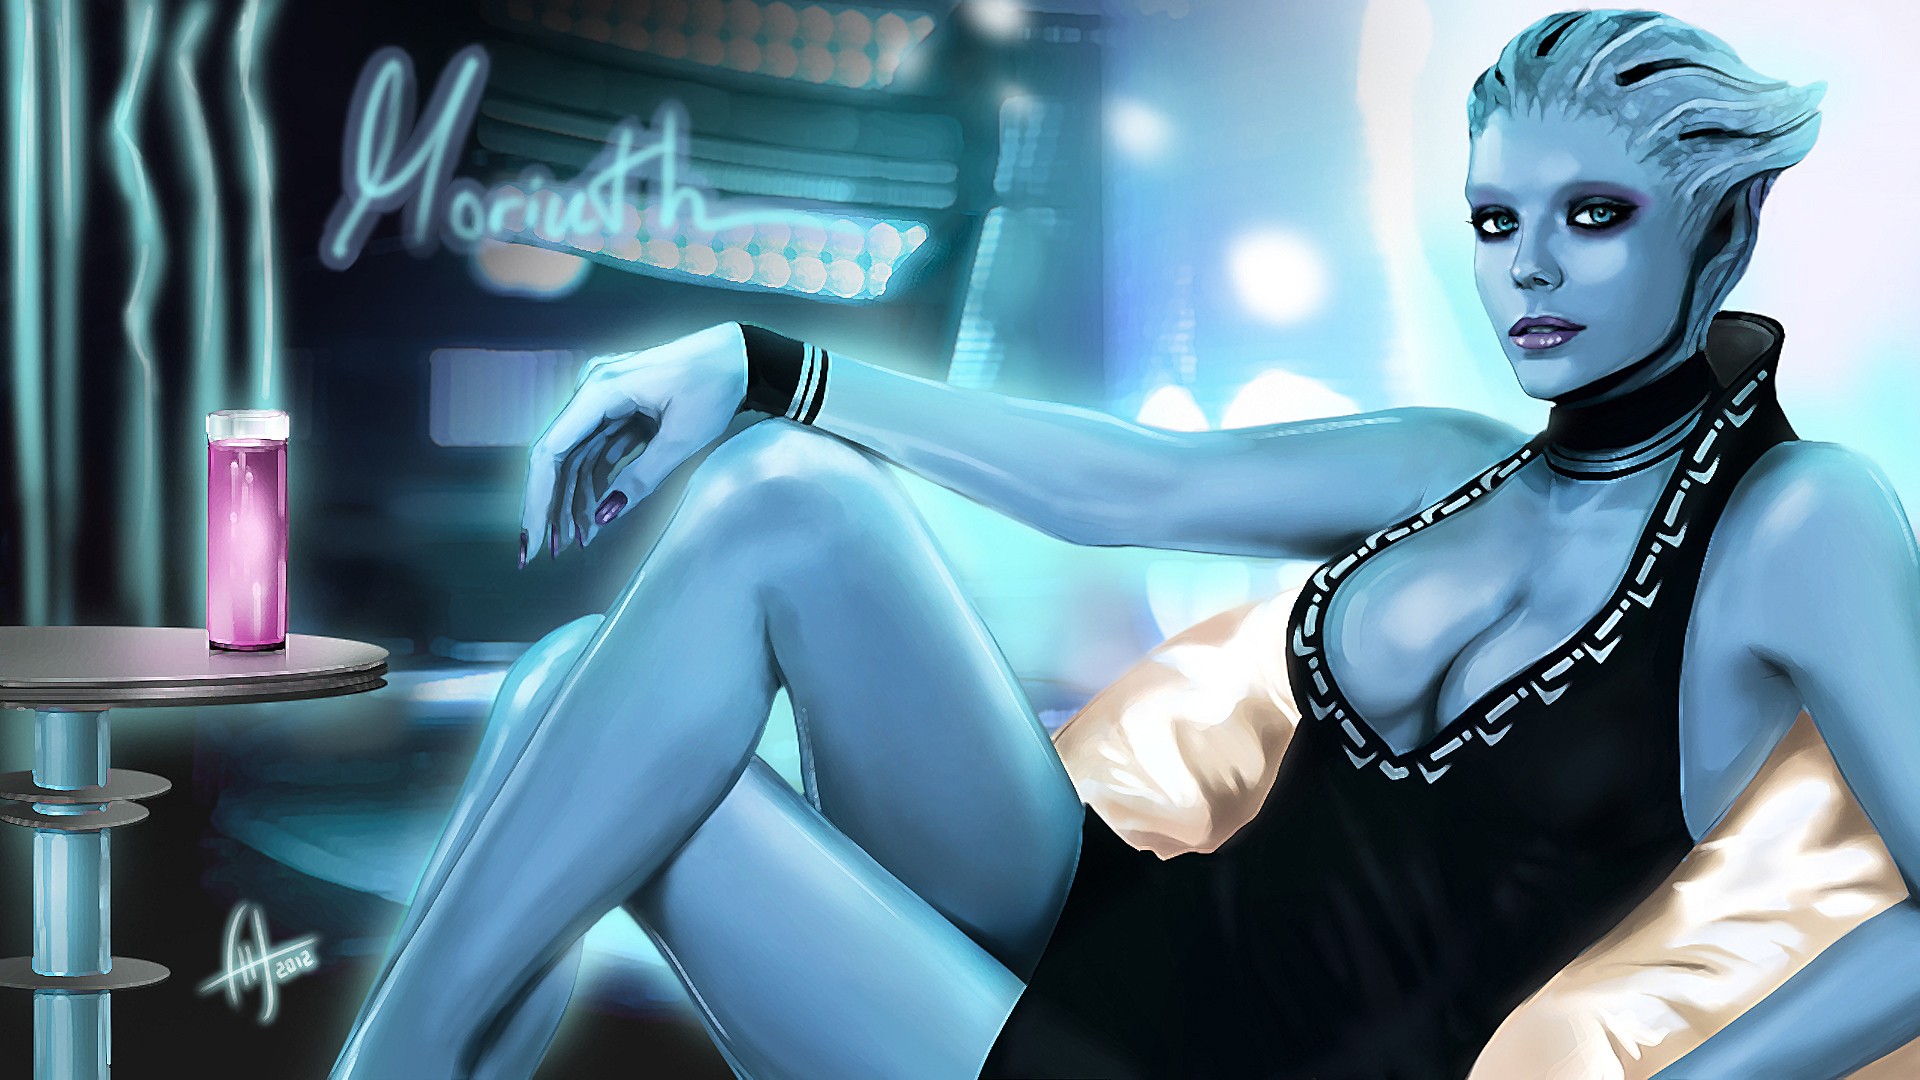 General 1920x1080 artwork video games Mass Effect Asari PC gaming legs legs crossed looking at viewer green eyes lipstick boobs dress video game art science fiction science fiction women